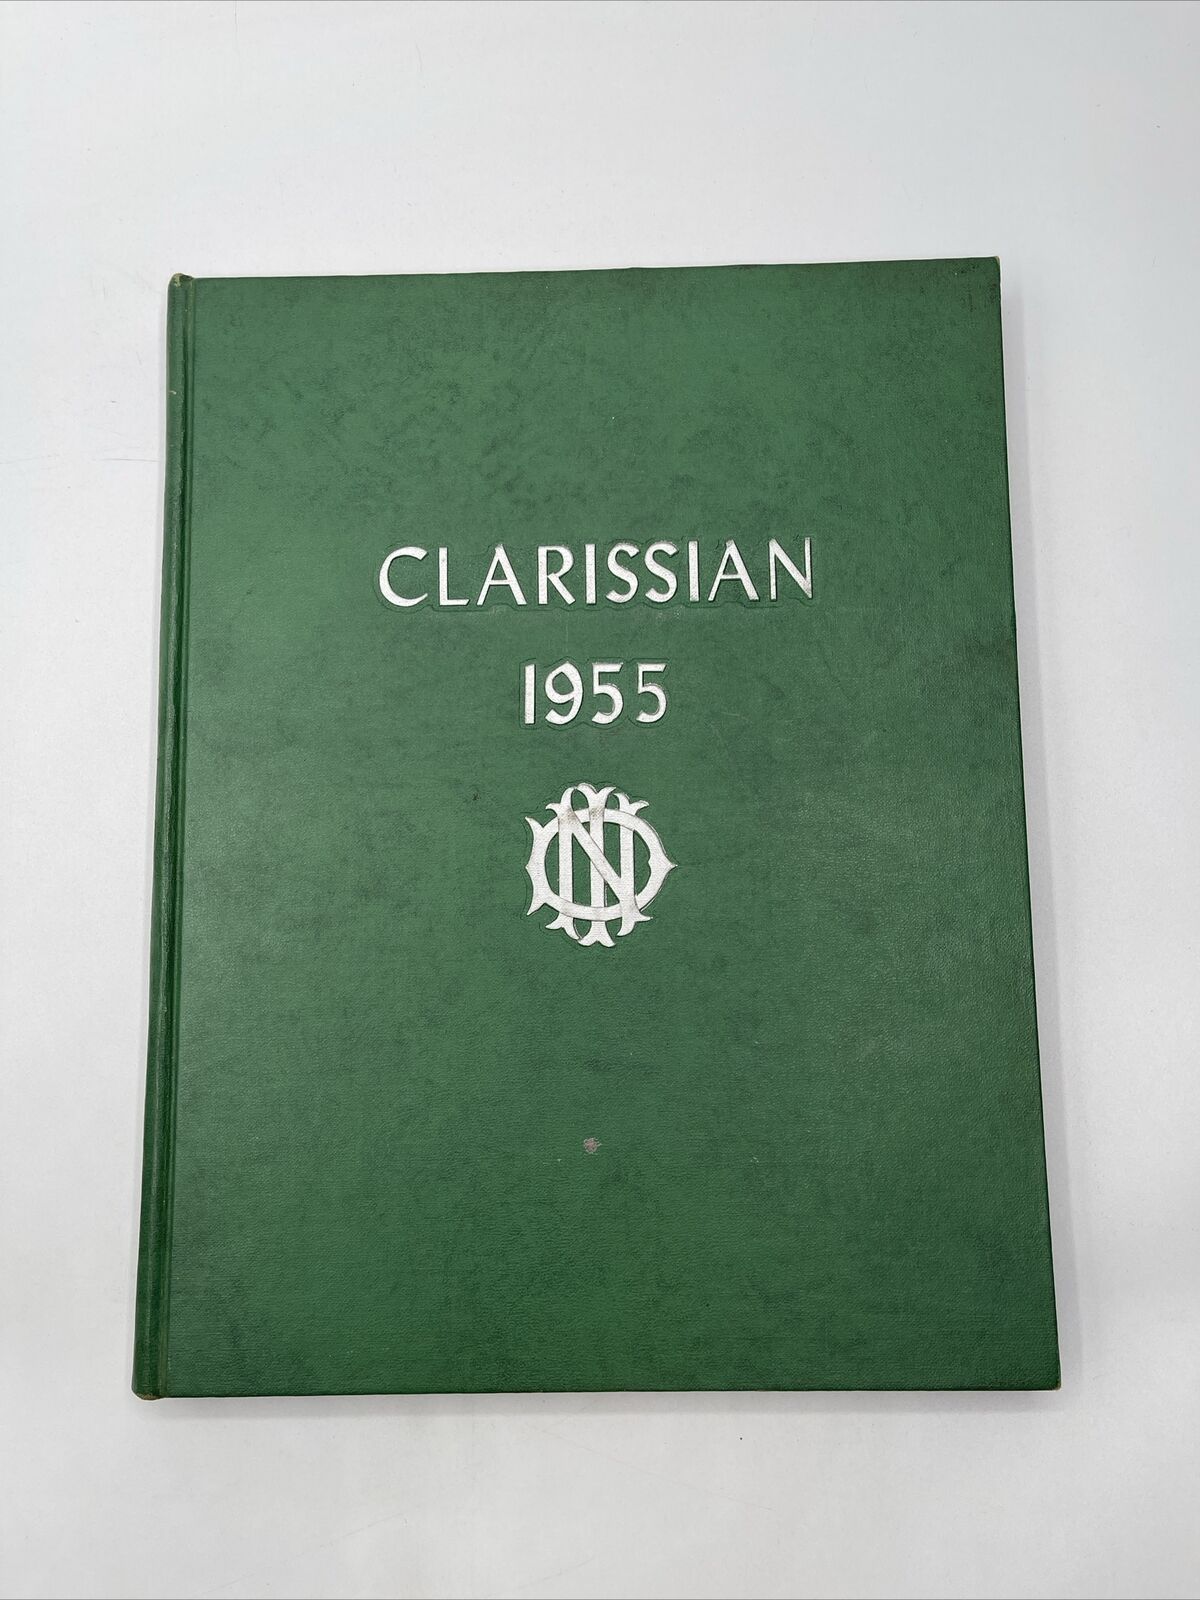 1955 Institute of Notre Dame Baltimore Maryland Clarissian Yearbook